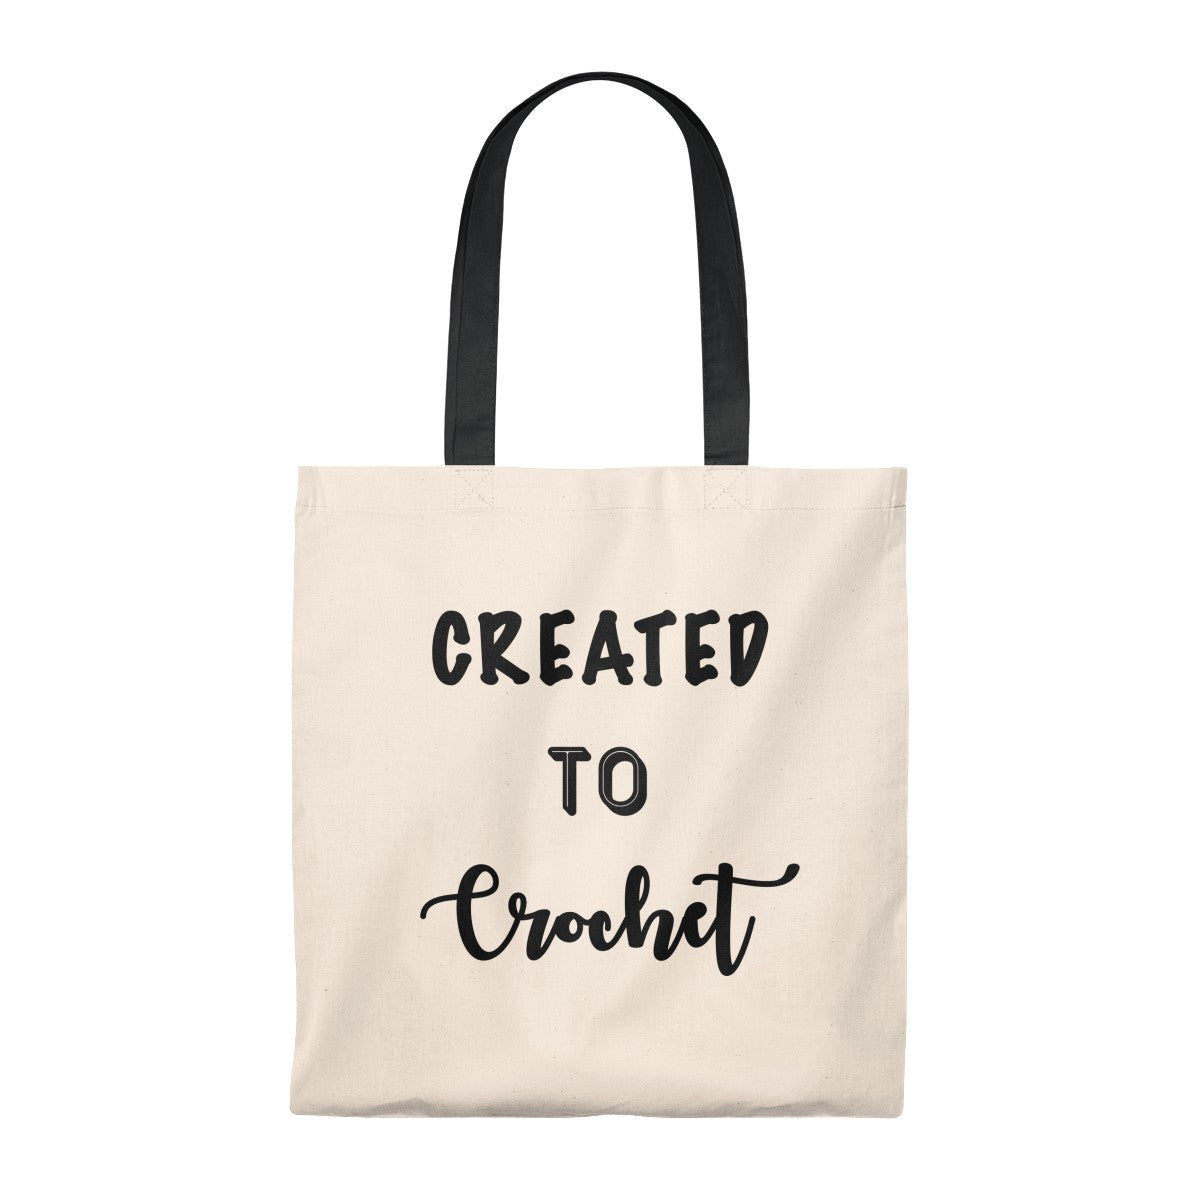 "Created to Crochet" - Tote Bag - Vintage